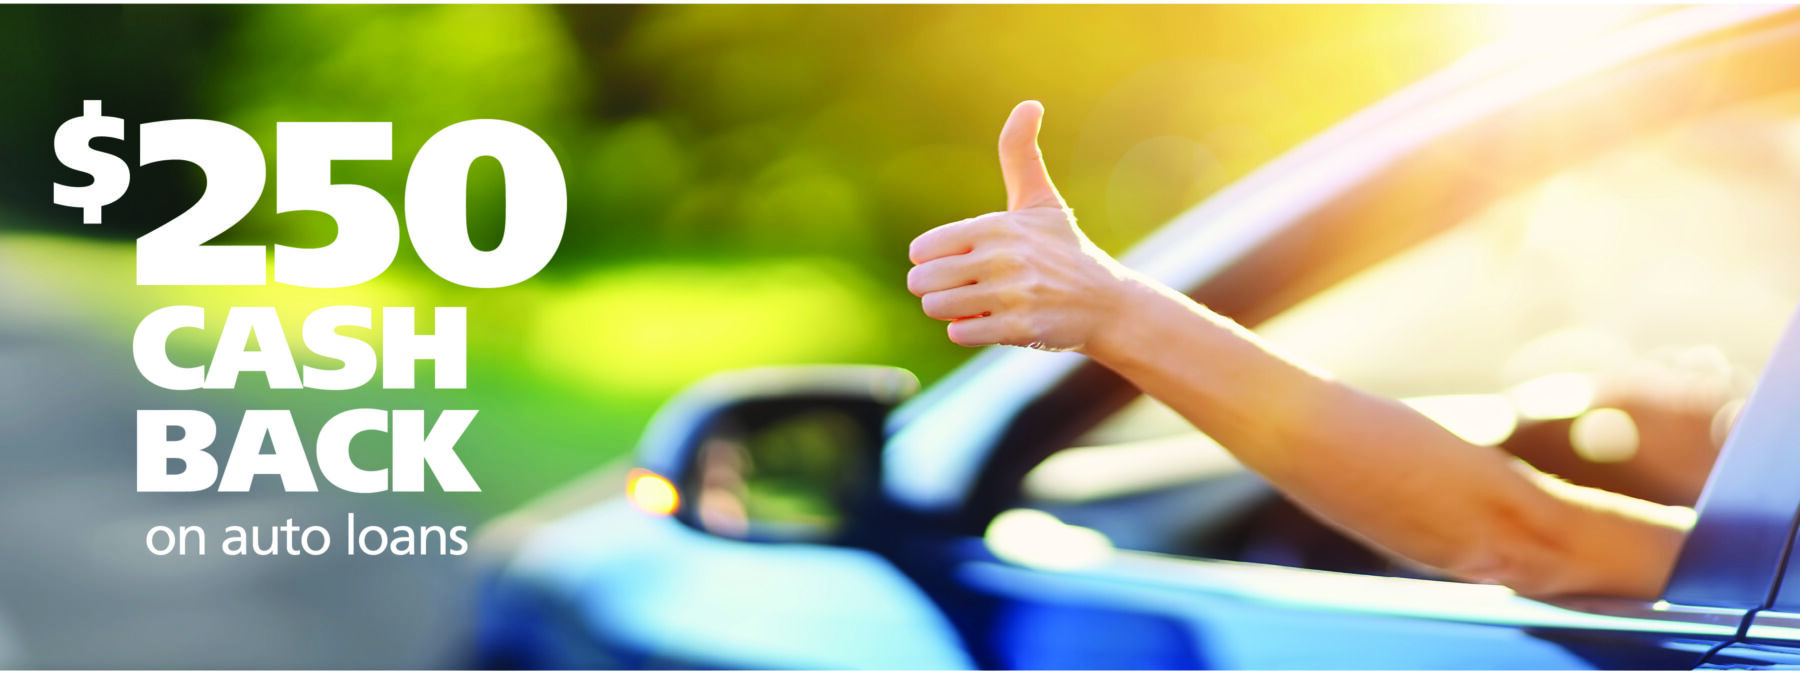 hand with thumbs up sign outside of open car window